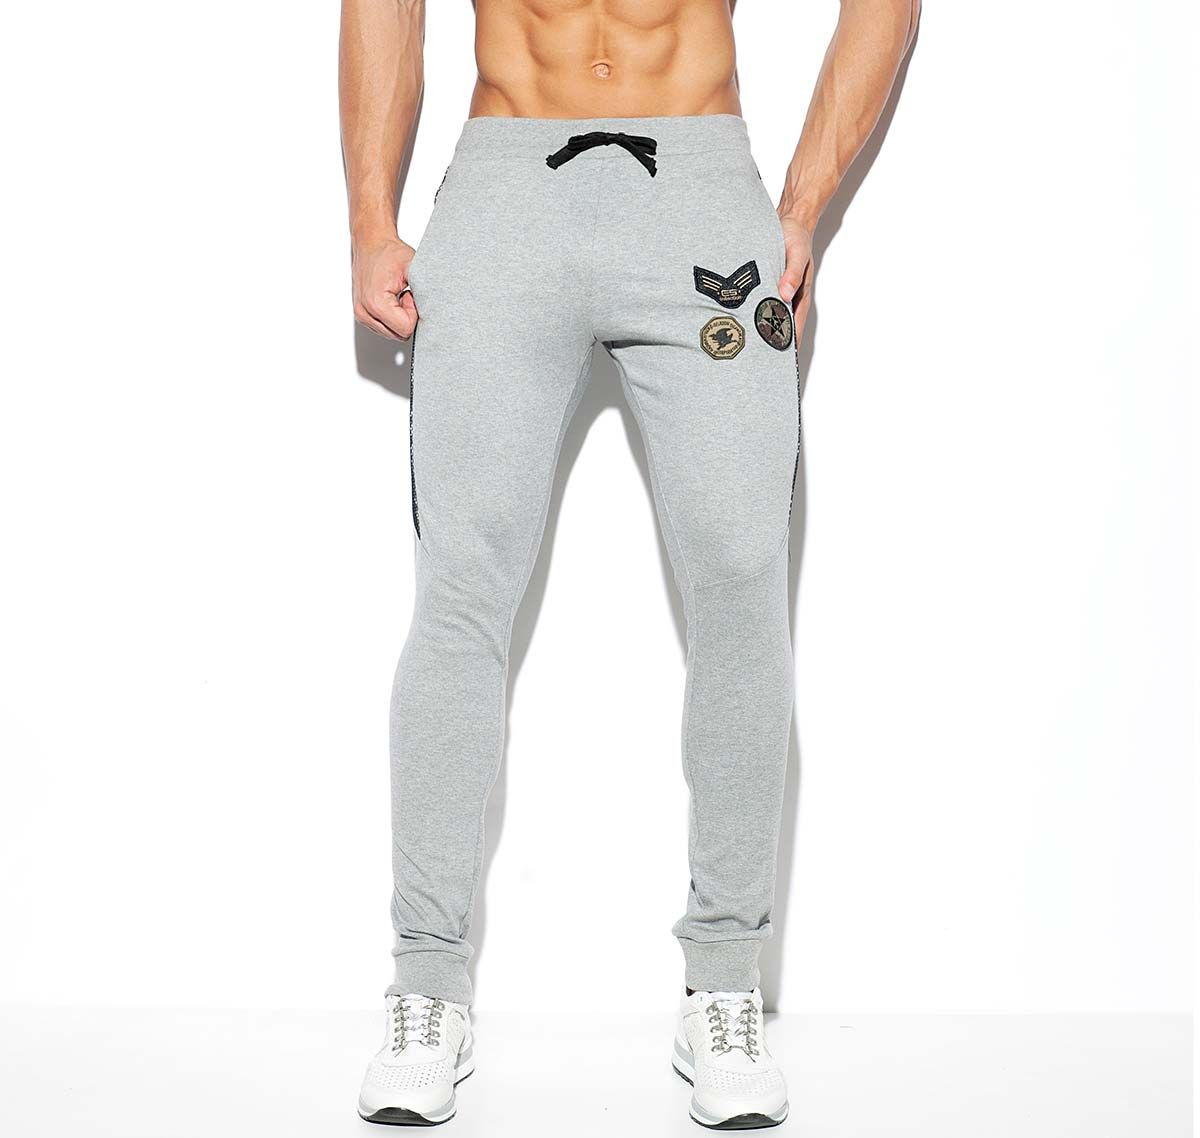 ES Collection Pantaloni sportivi lunghi ARMY PADDED SPORT PANTS SP221, grigio